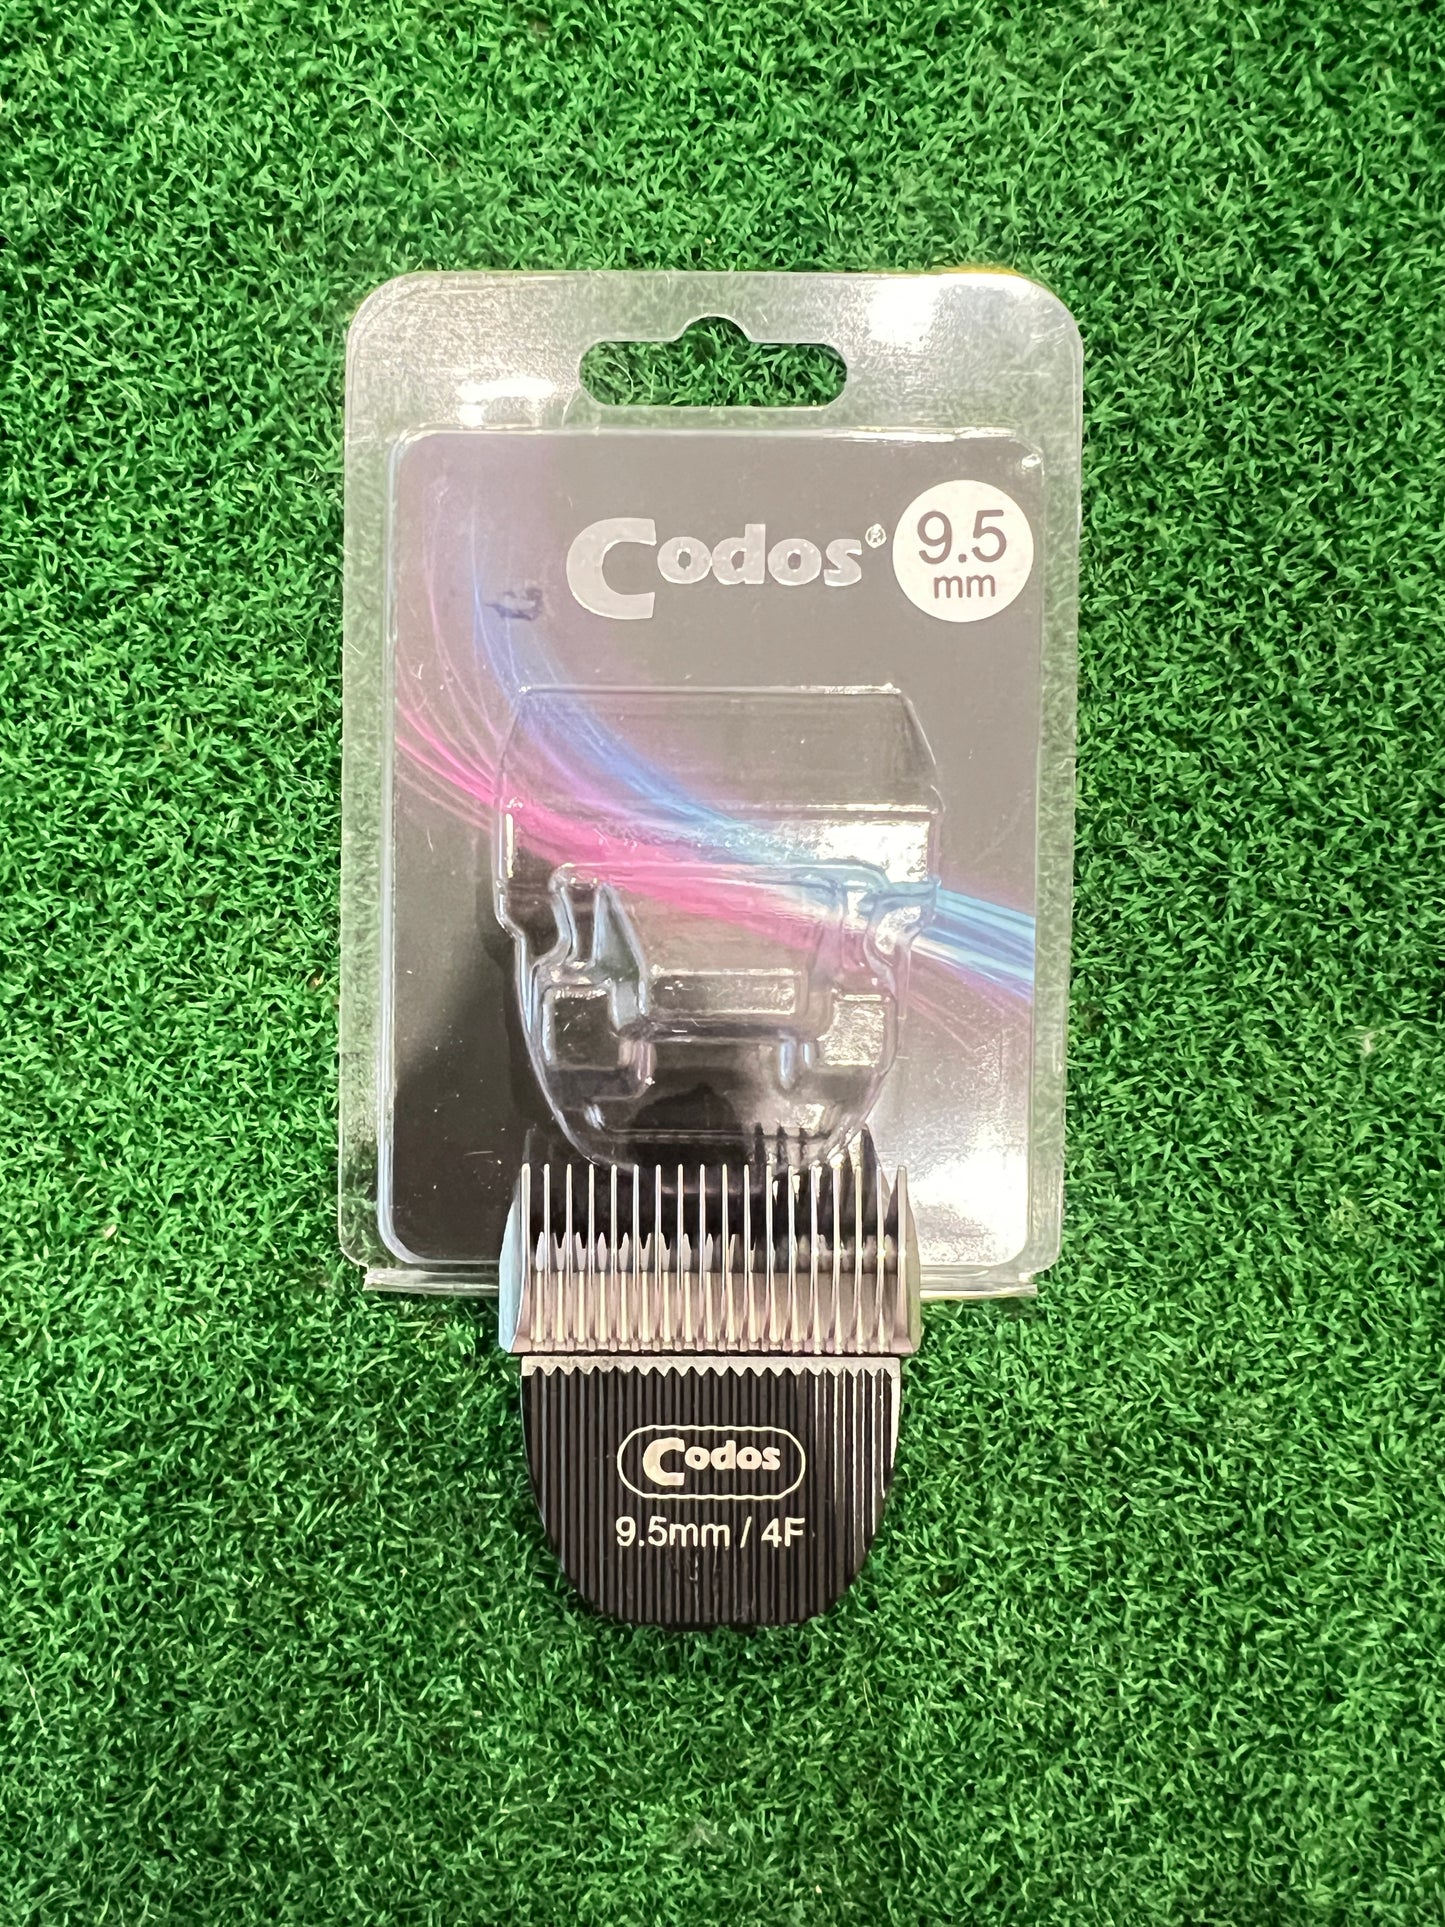 Codos Professional Hair Clipper Replacement Head Blade Shaver #4f (9.5mm)